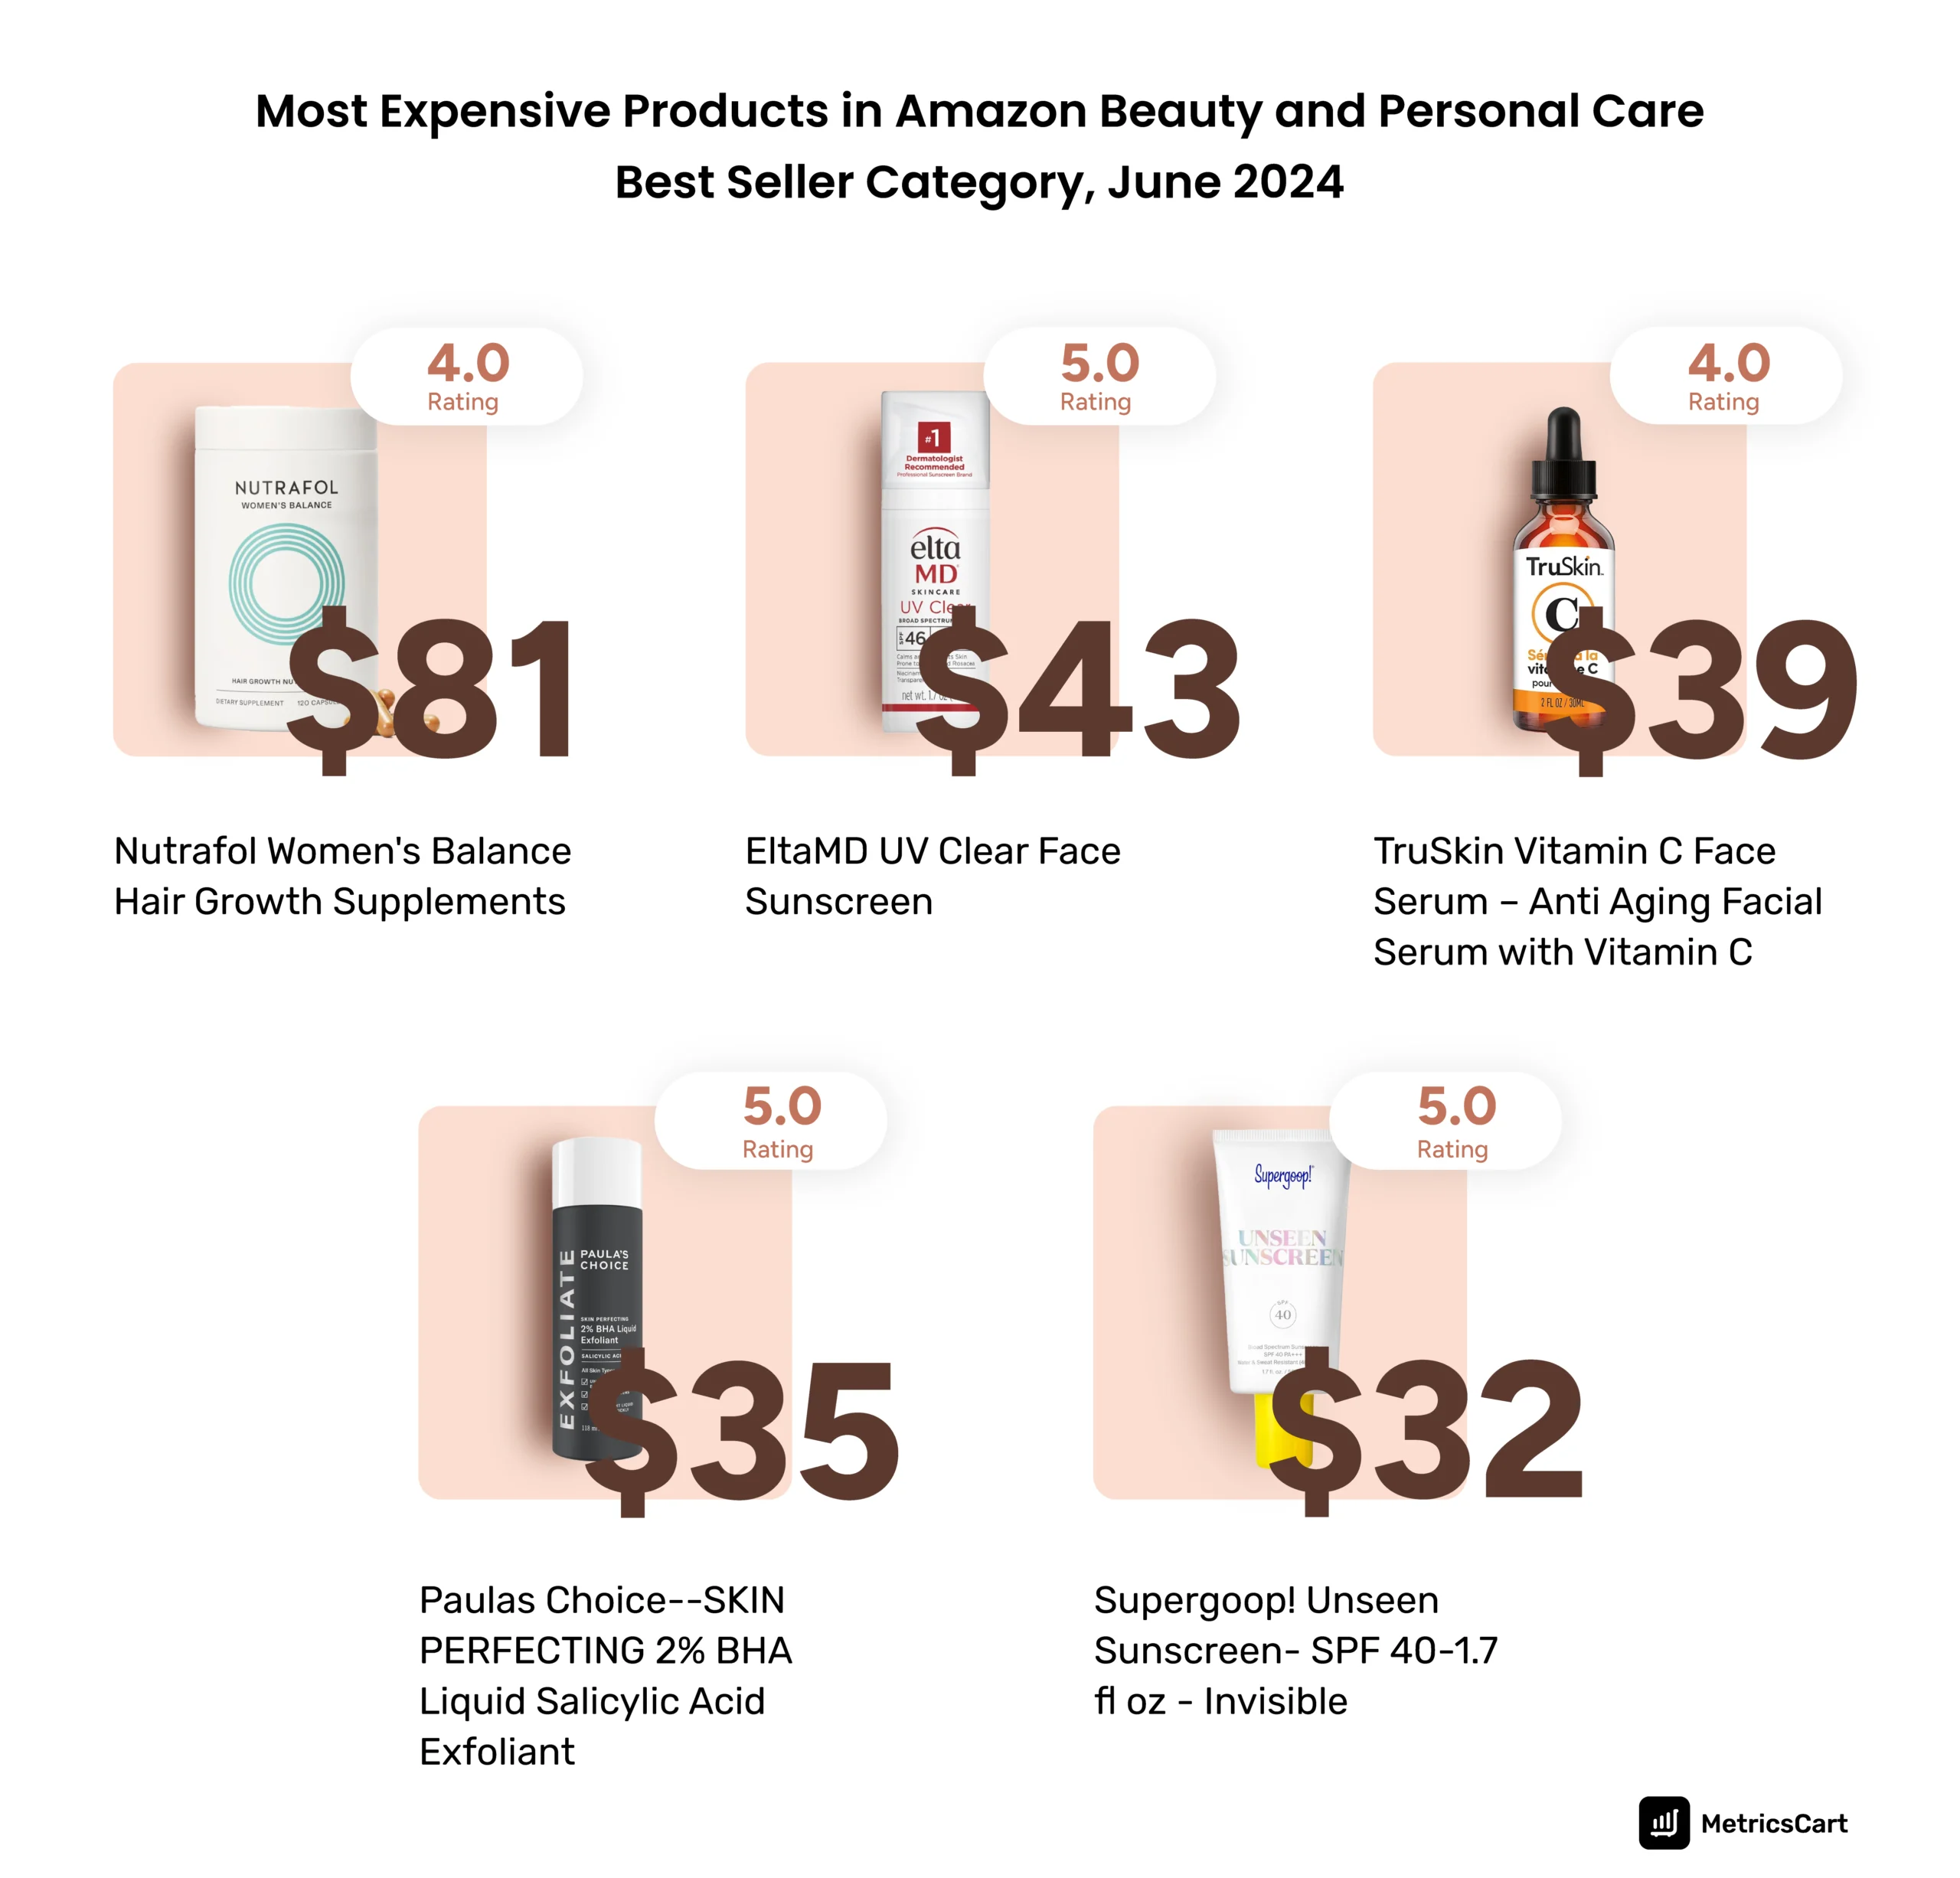 the most expensive products in Amazon beauty and personal care Best Seller category